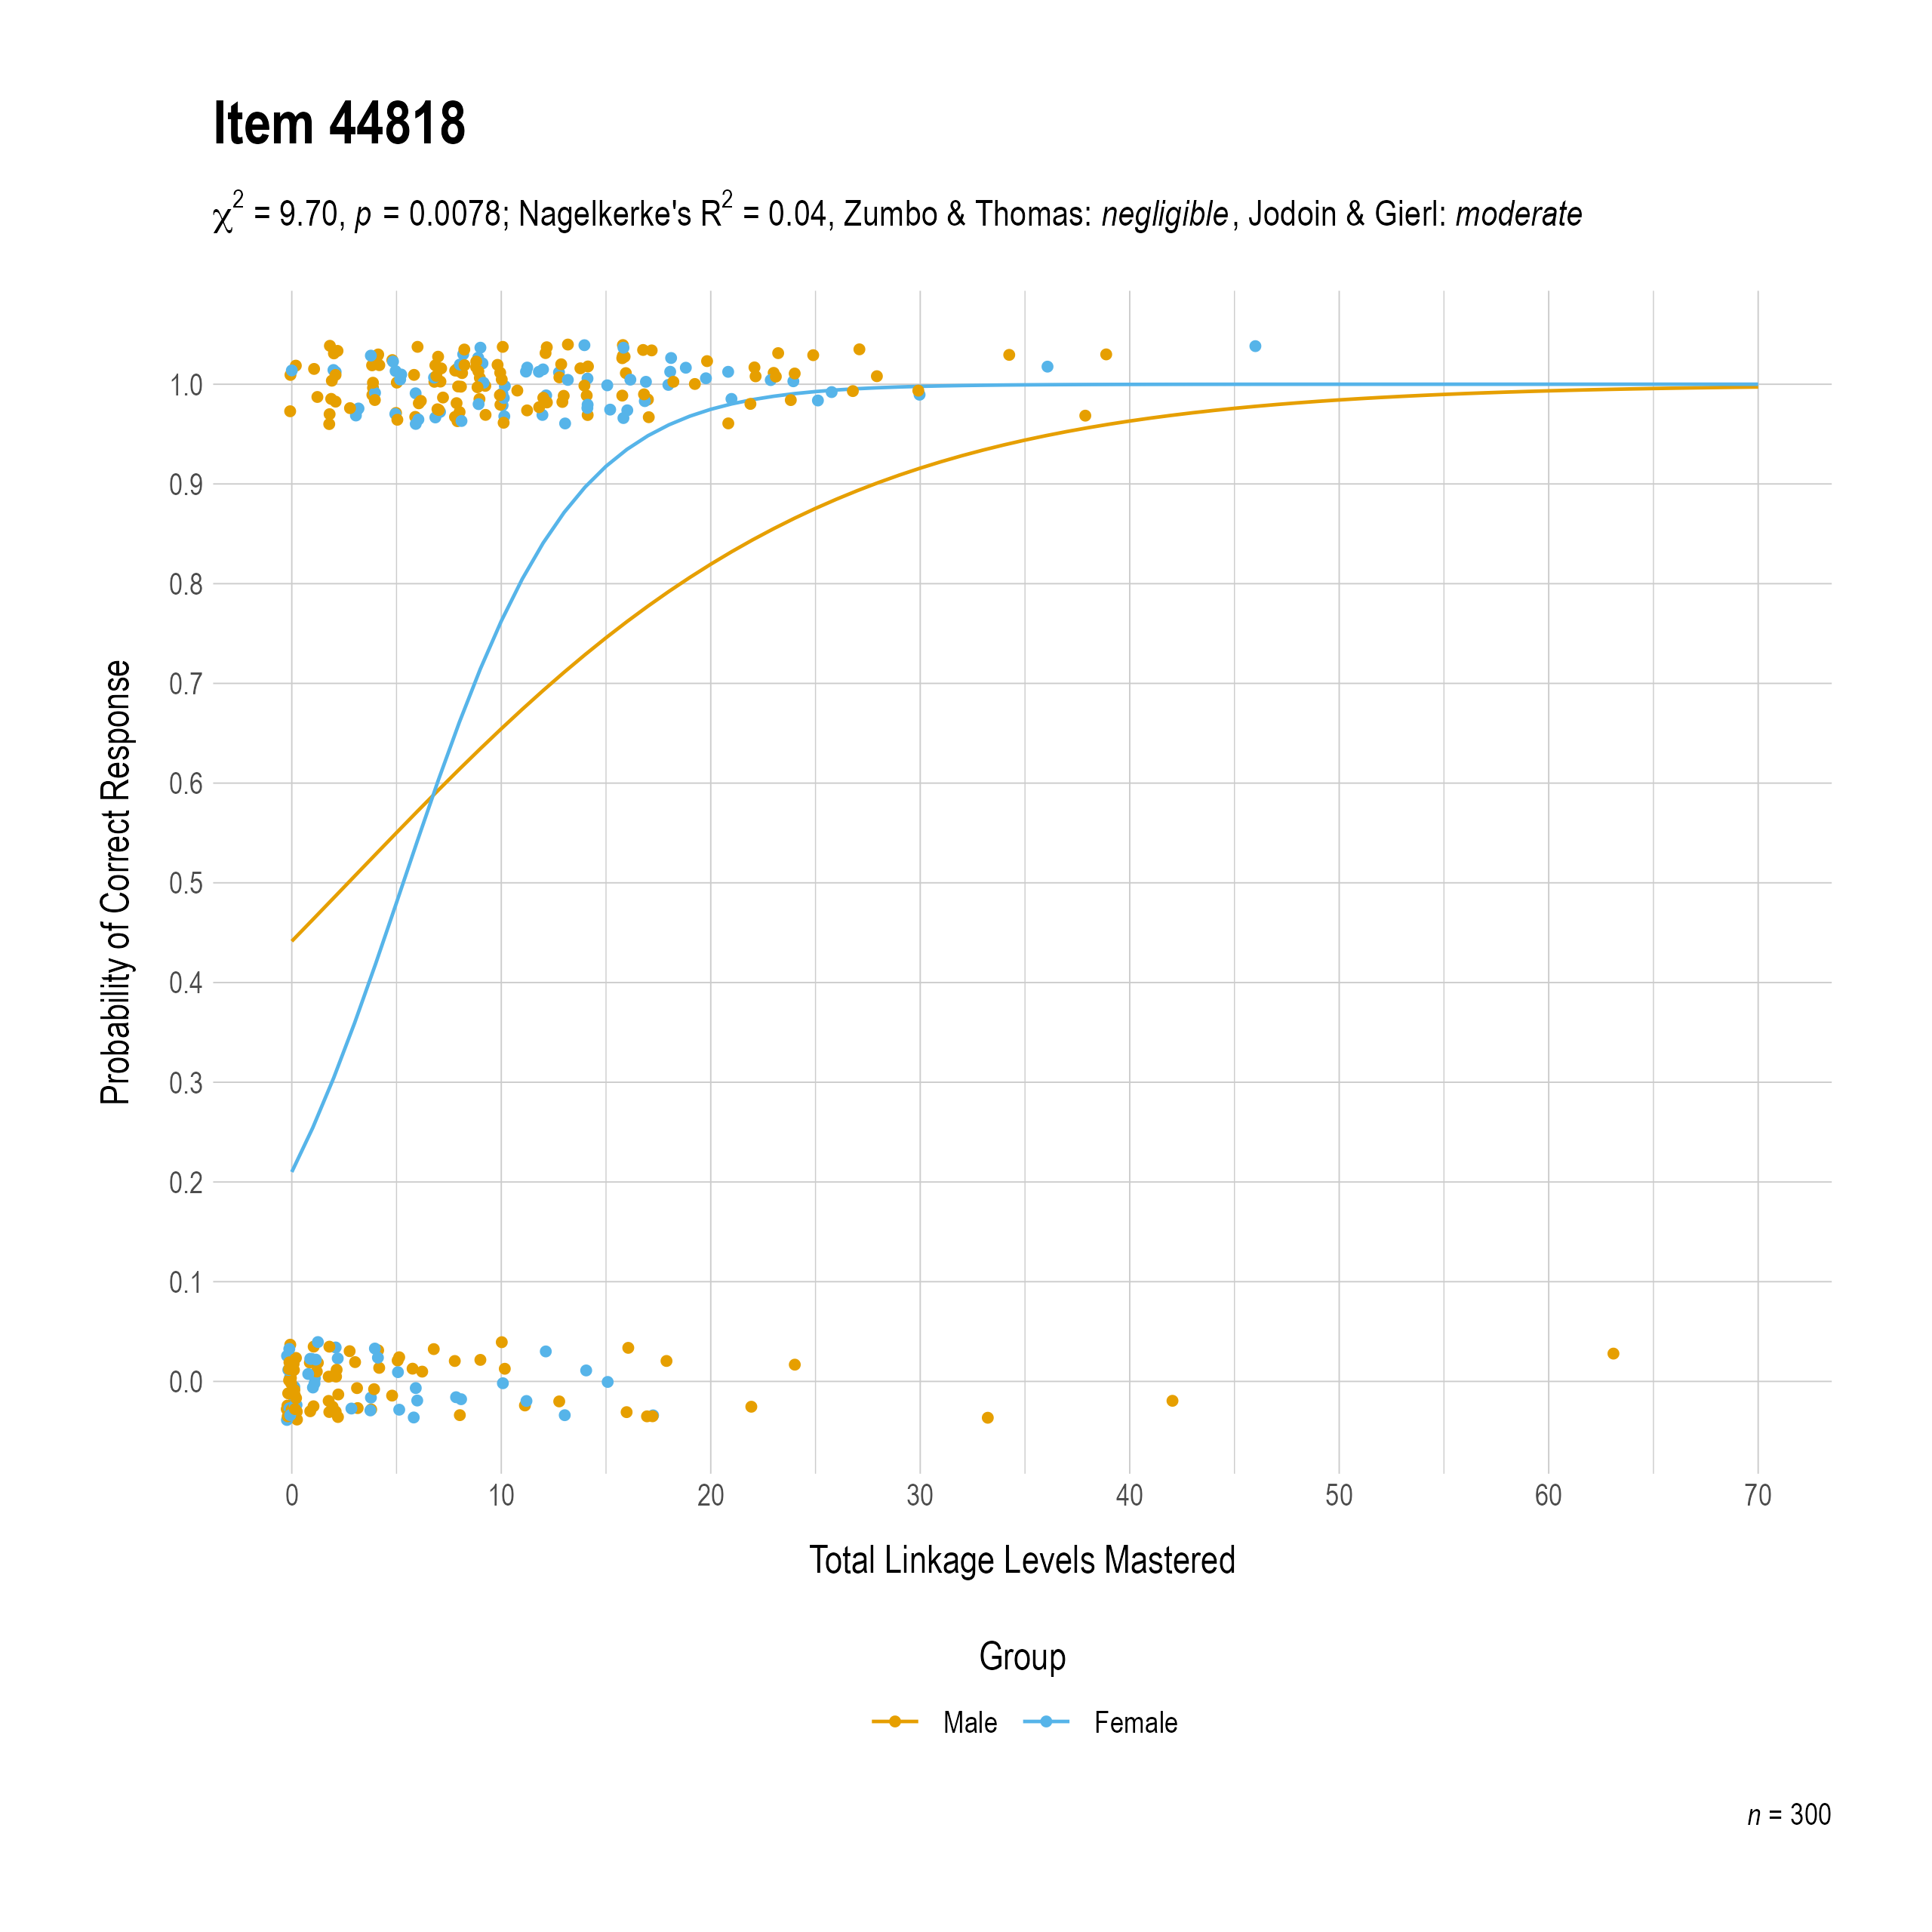 The plot of the combined gender differential item function evidence for English language arts item 44818. The figure contains points shaded by group. The figure also contains a logistic regression curve for each group. The total linkage levels mastered in is on the x-axis, and the probability of a correct response is on the y-axis.